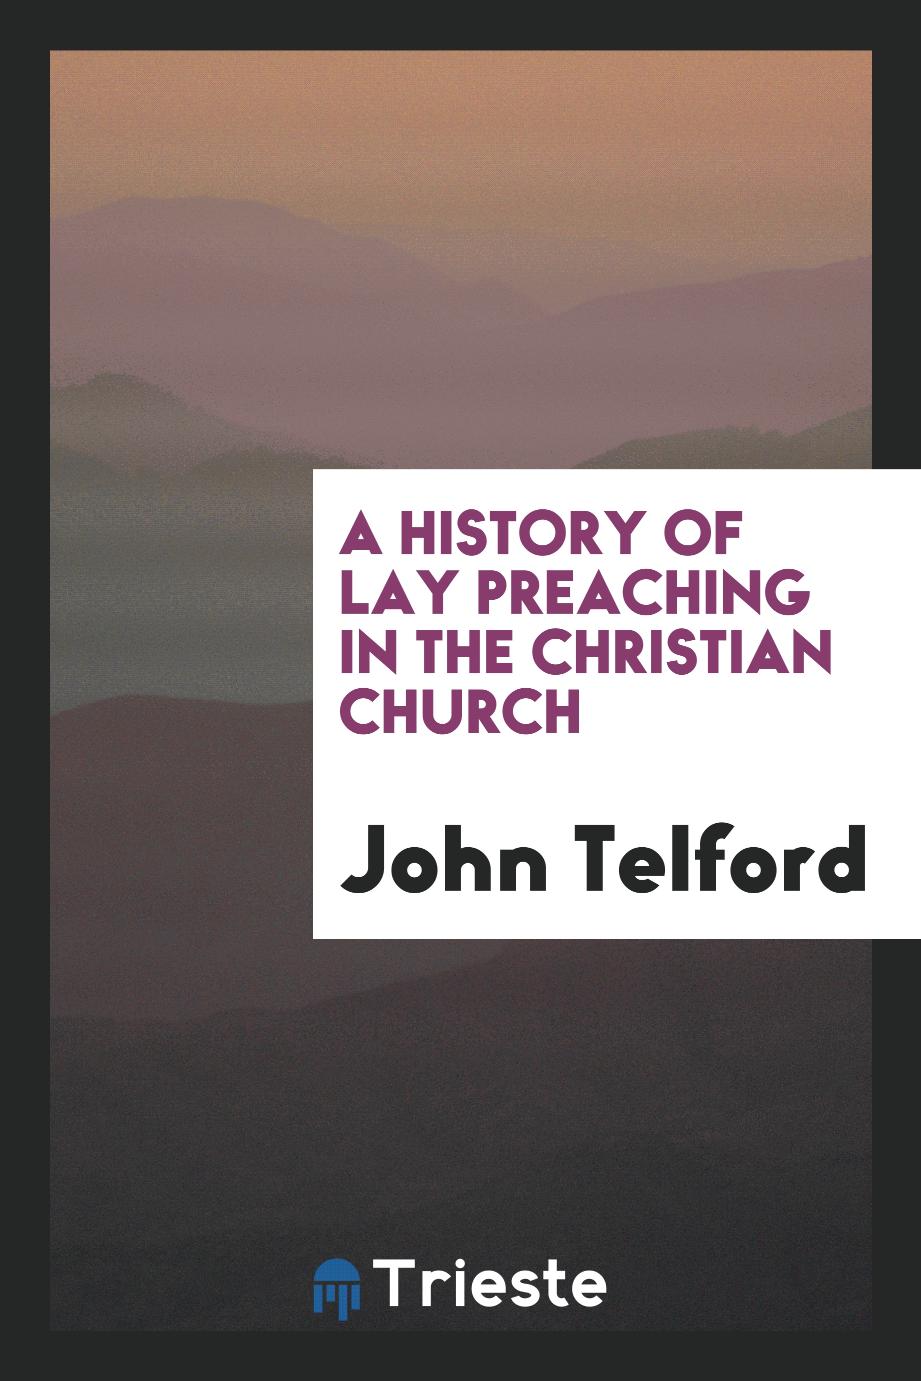 A history of lay preaching in the Christian church